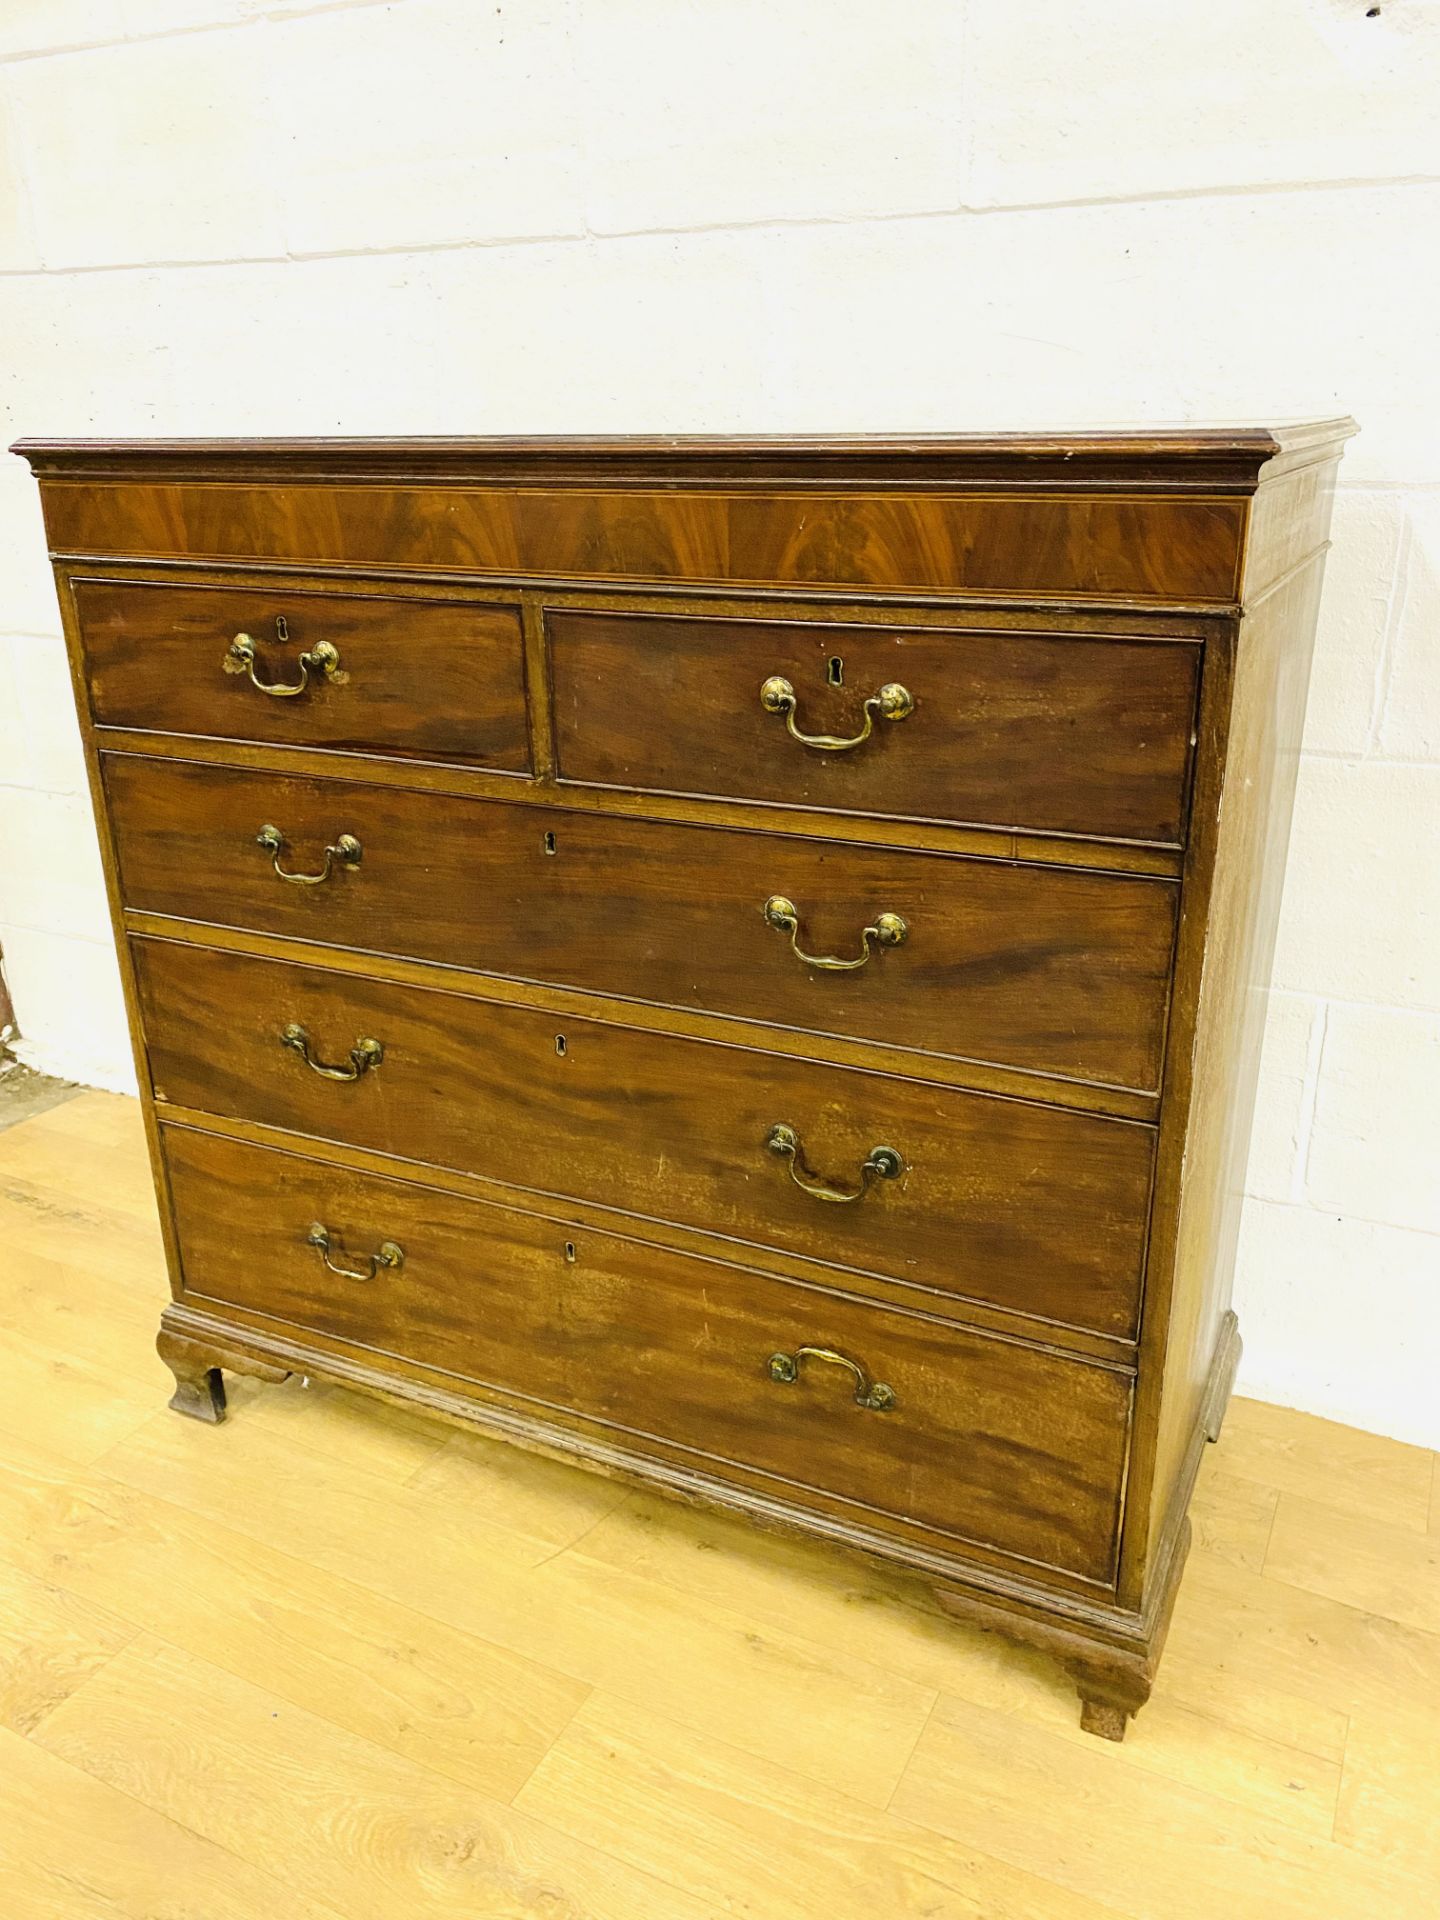 Mahogany chest of drawers - Image 4 of 7